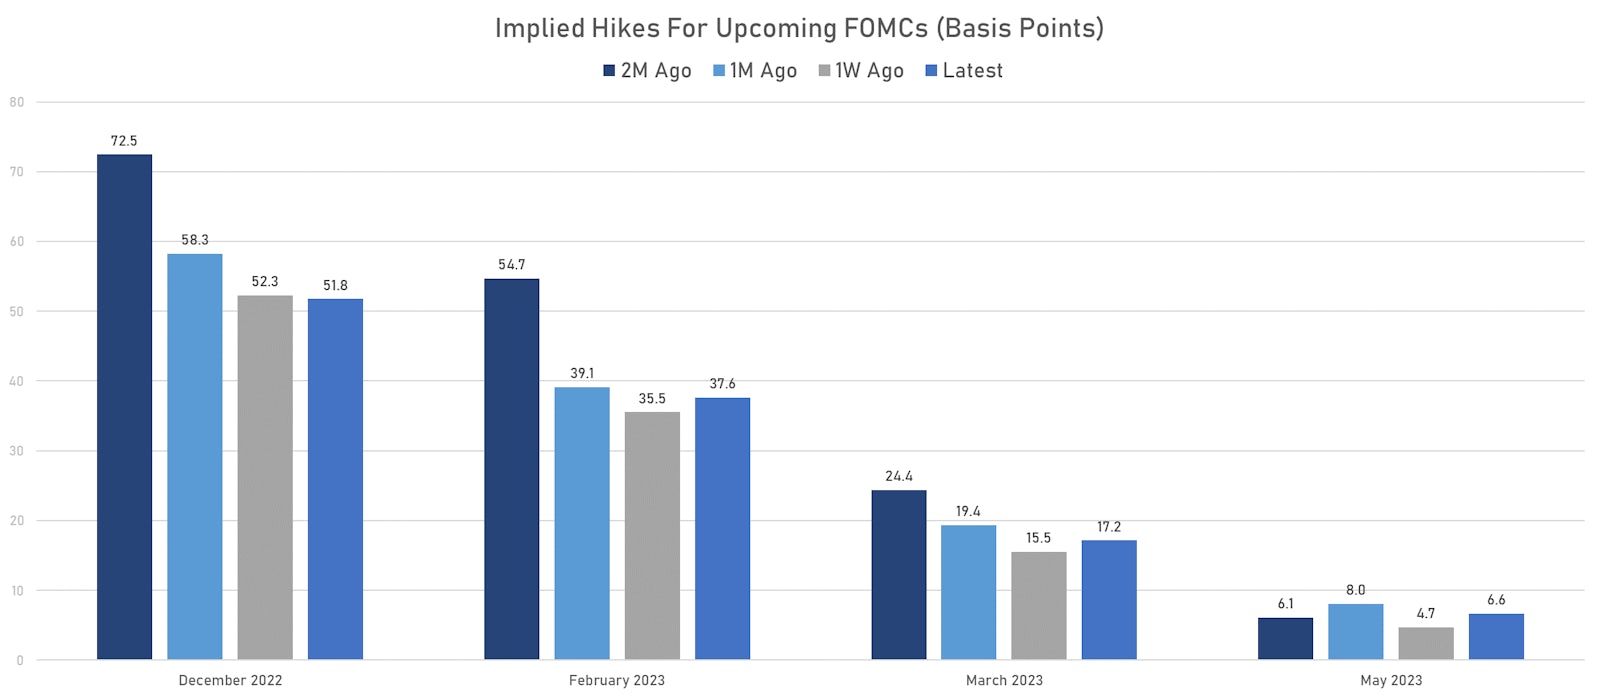 Implied Hikes For Upcoming FOMCs | Sources: ϕpost, Refinitiv data